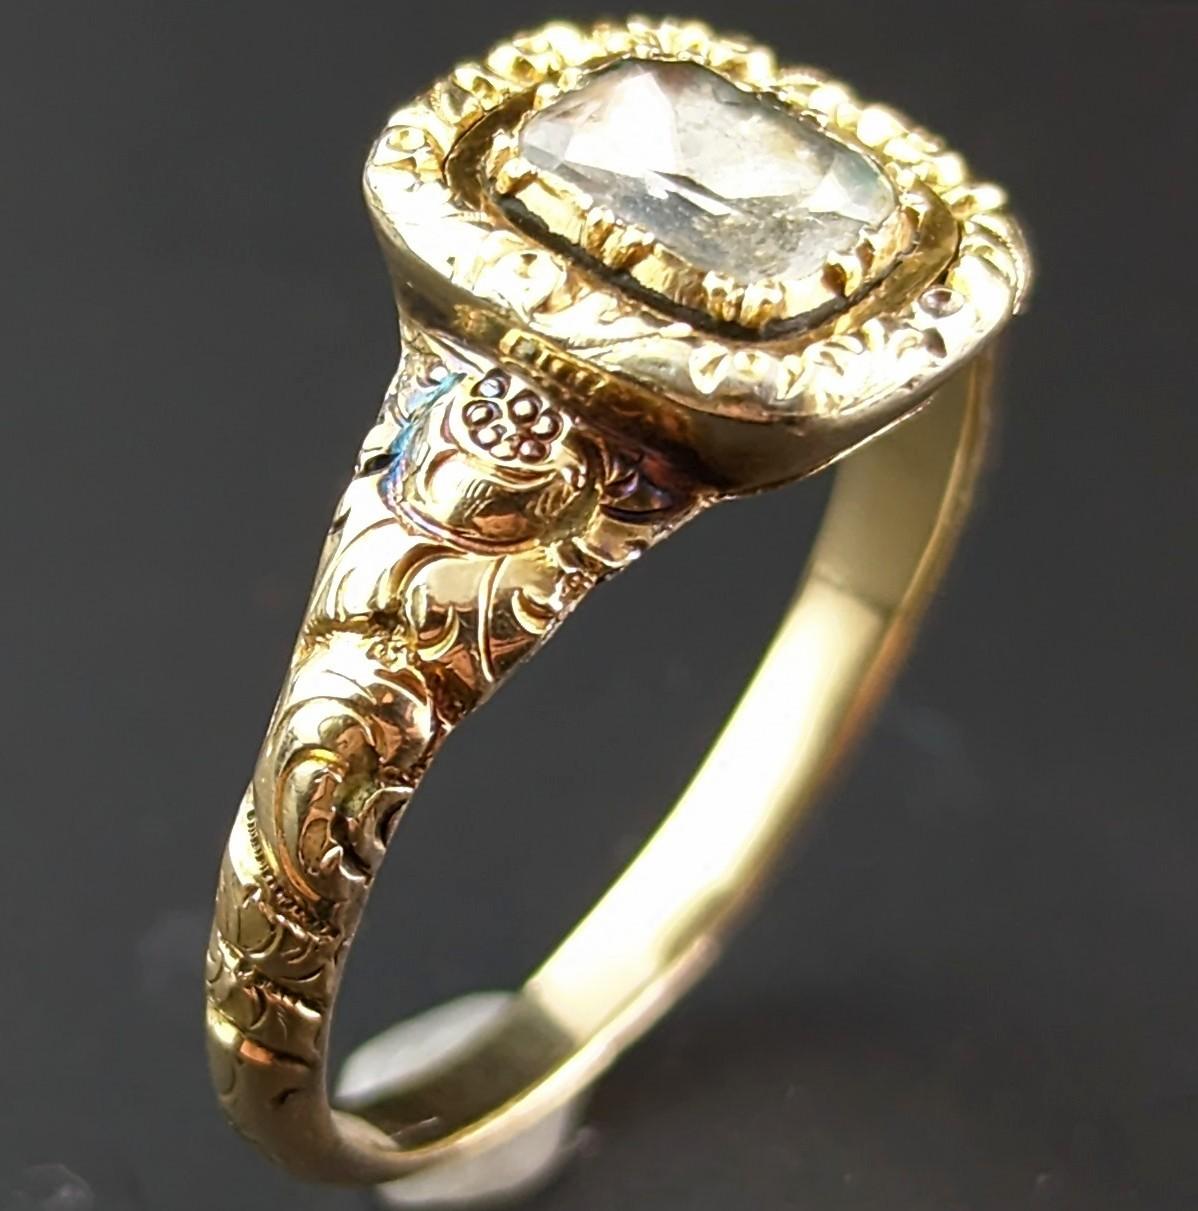 Antique Georgian Foiled Quartz Ring, 12k Gold, Chase and Engraved 1